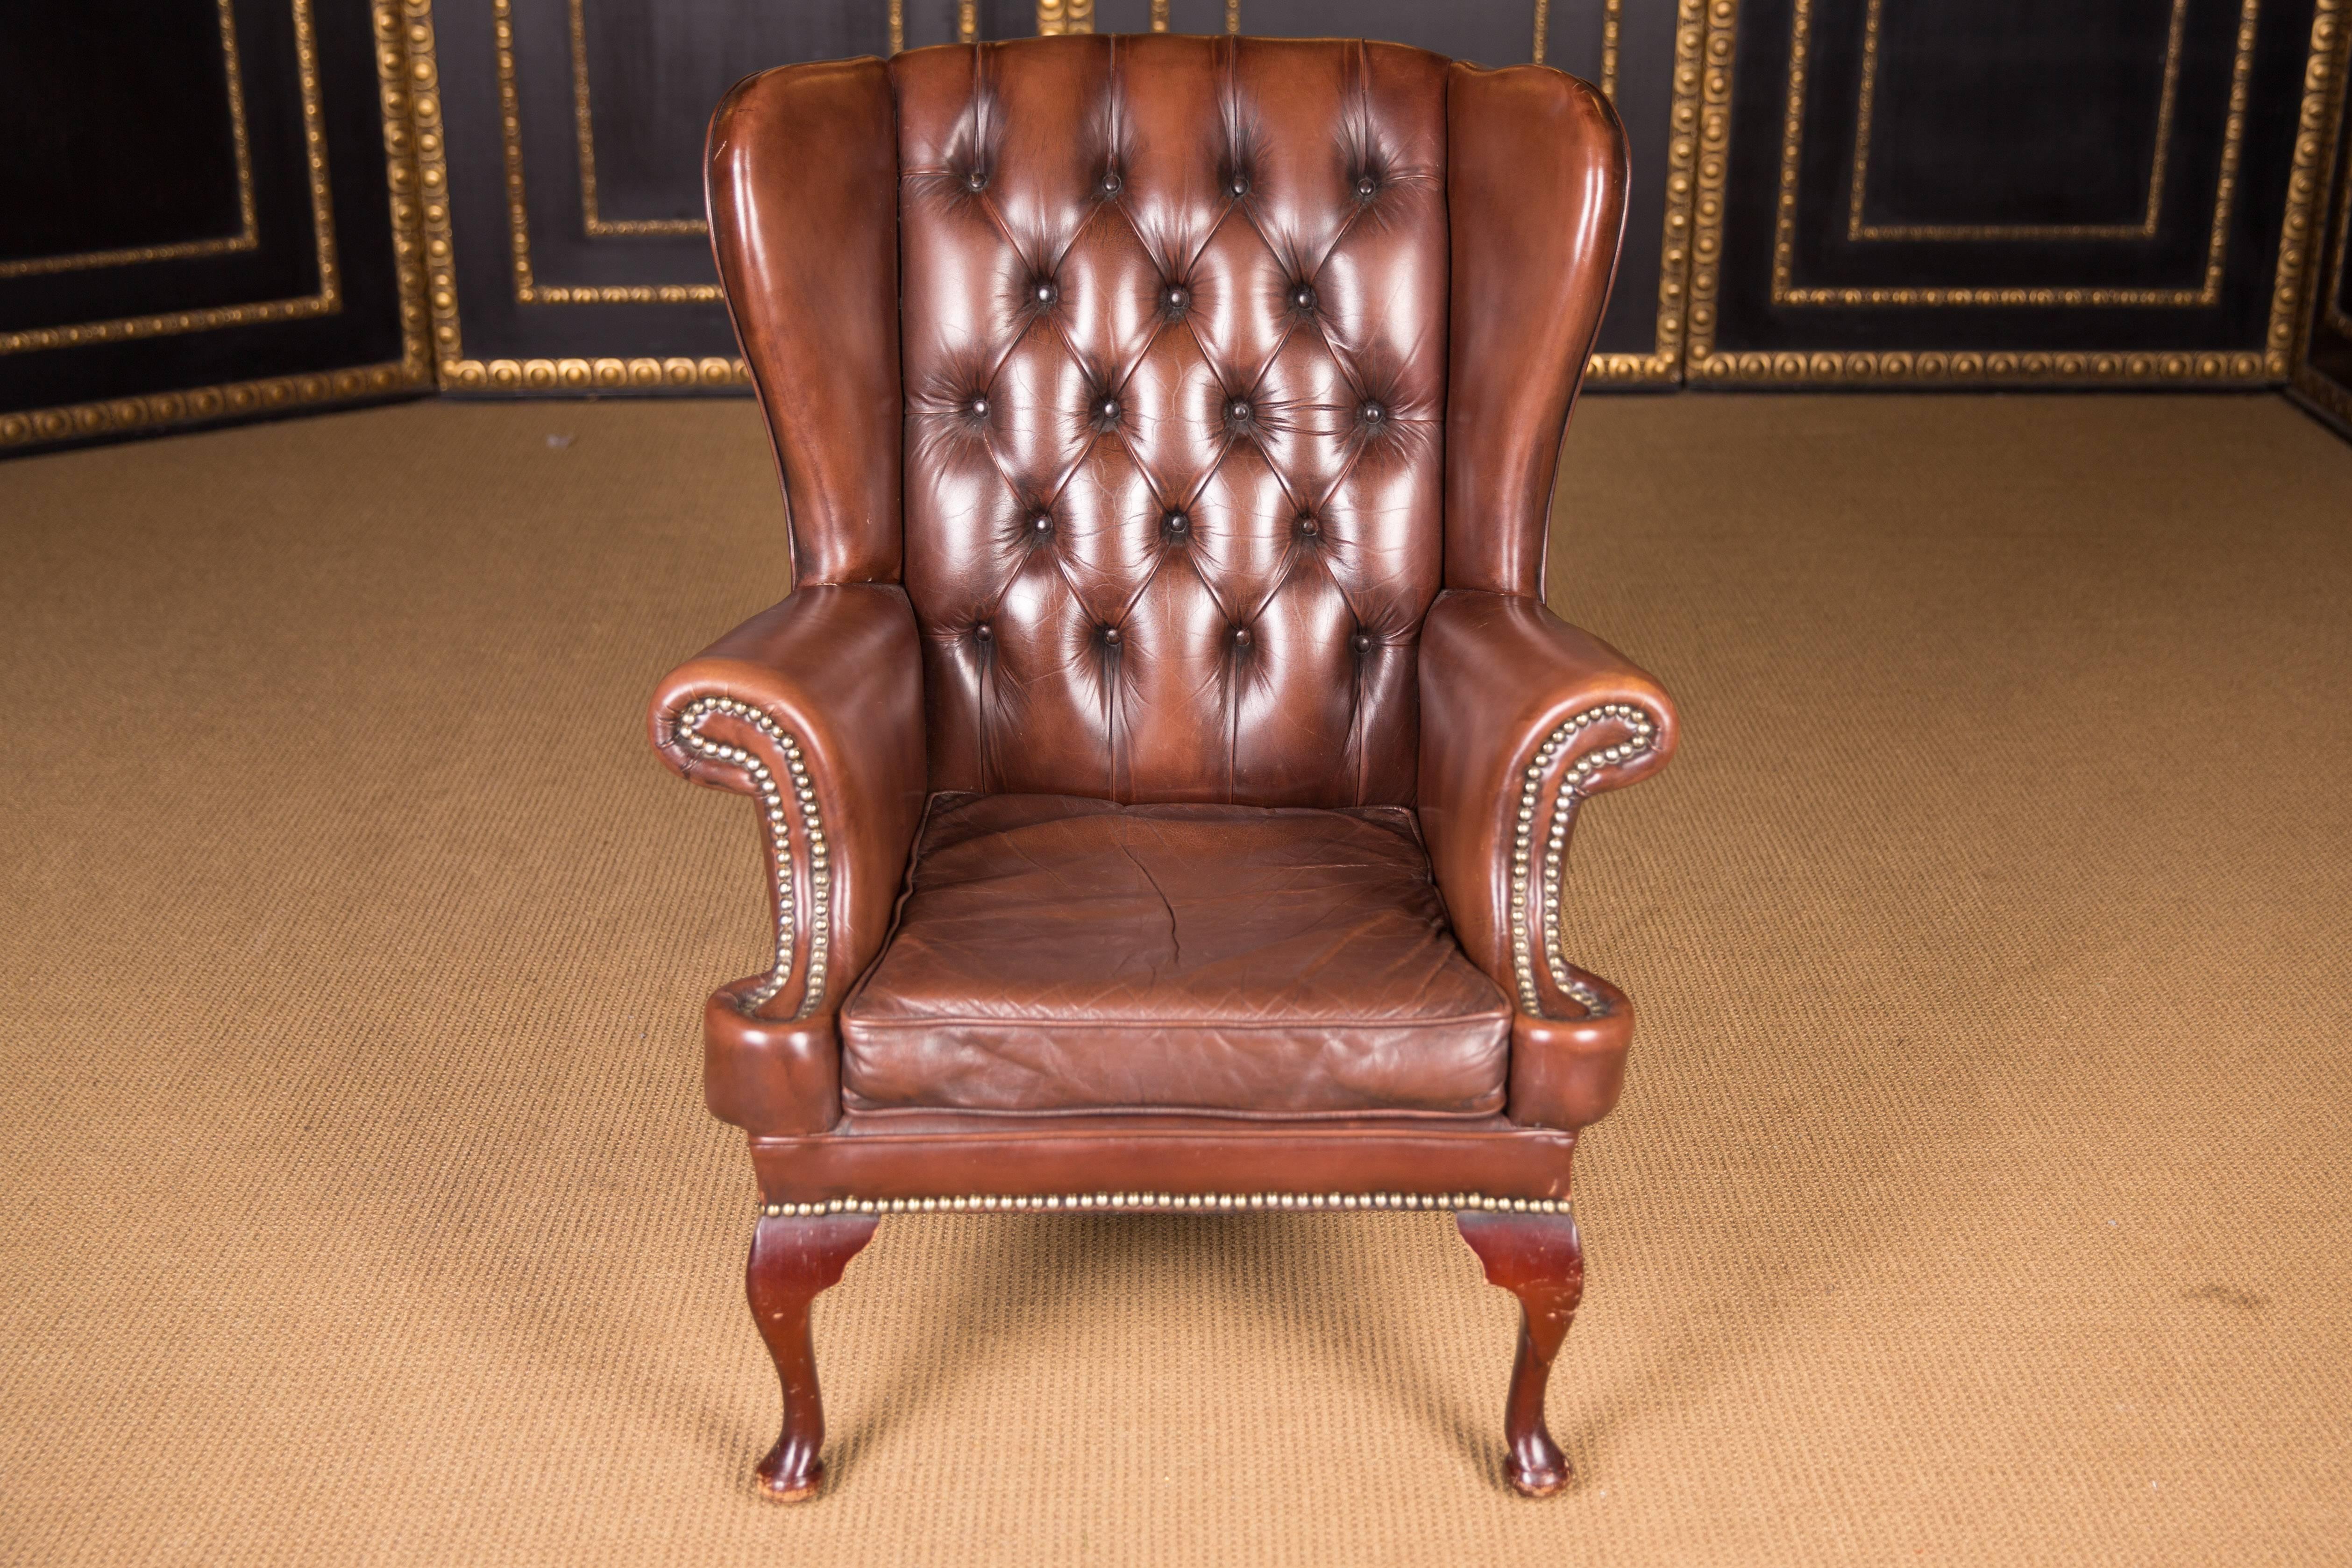 Leather mahogany Classic Chesterfield clay armchair. The line in detail make this furniture simply unique.

The Chesterfield armchair is covered with real, finest leather. The leather is of best quality, very easy to maintain and durable in use.